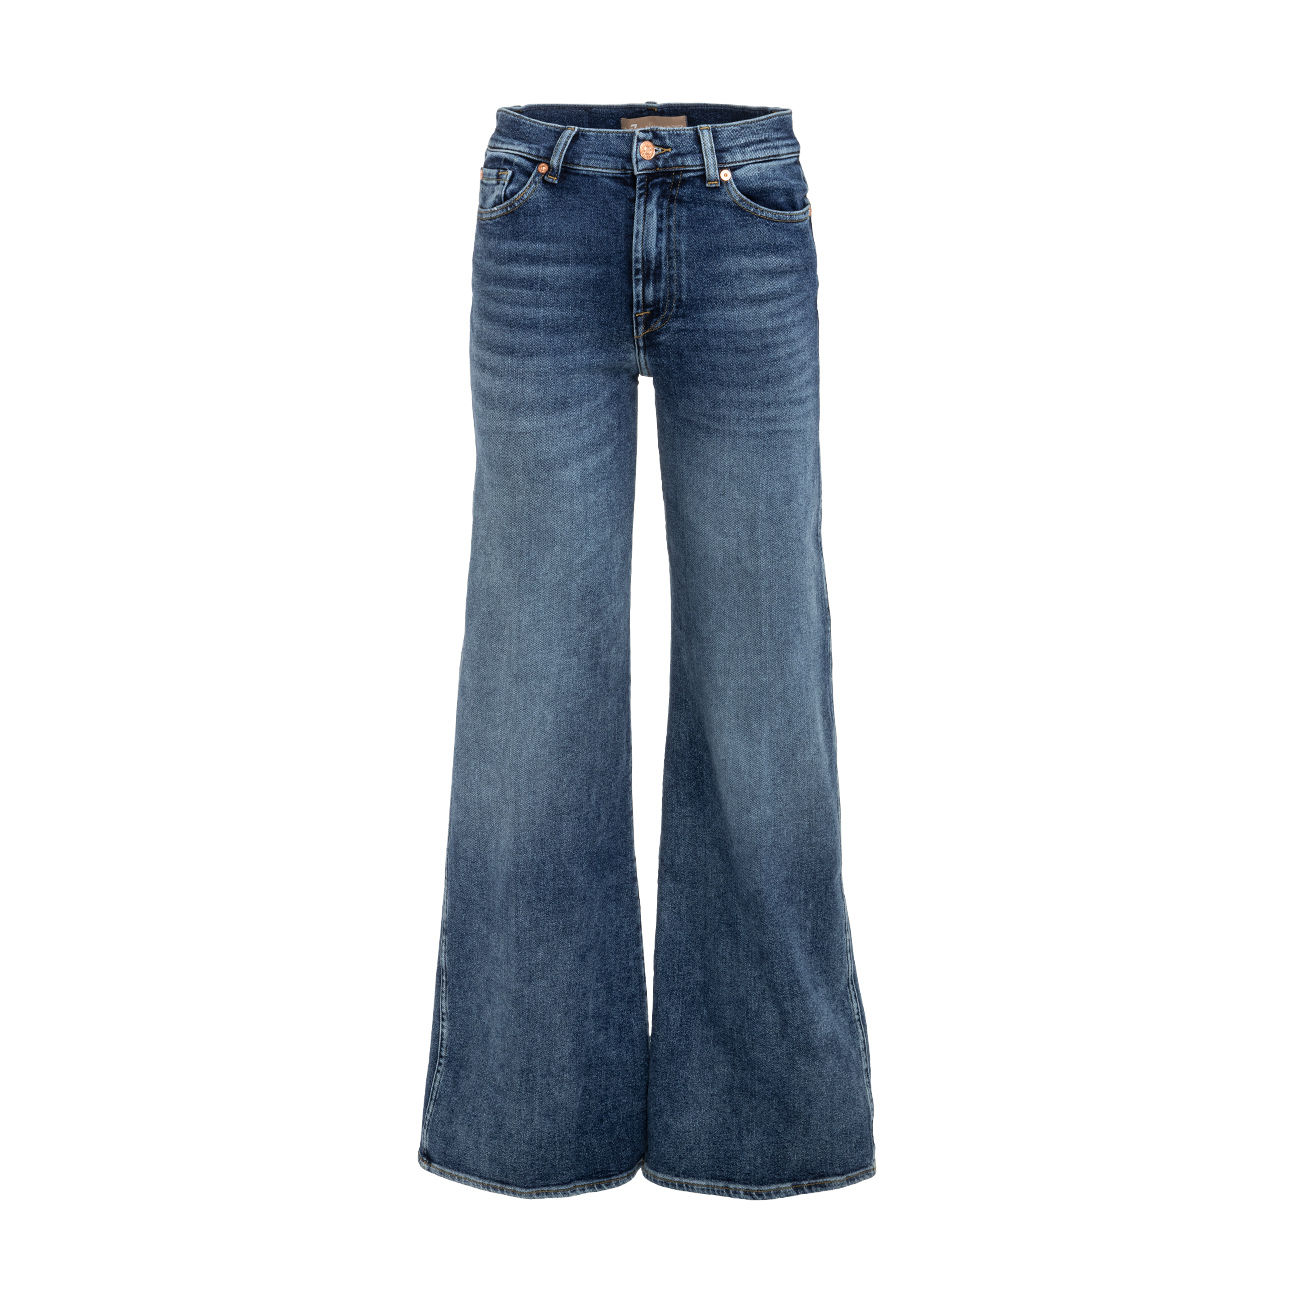 Lotta Luxe Vintage high-rise wide-leg jeans in blue - 7 For All Mankind